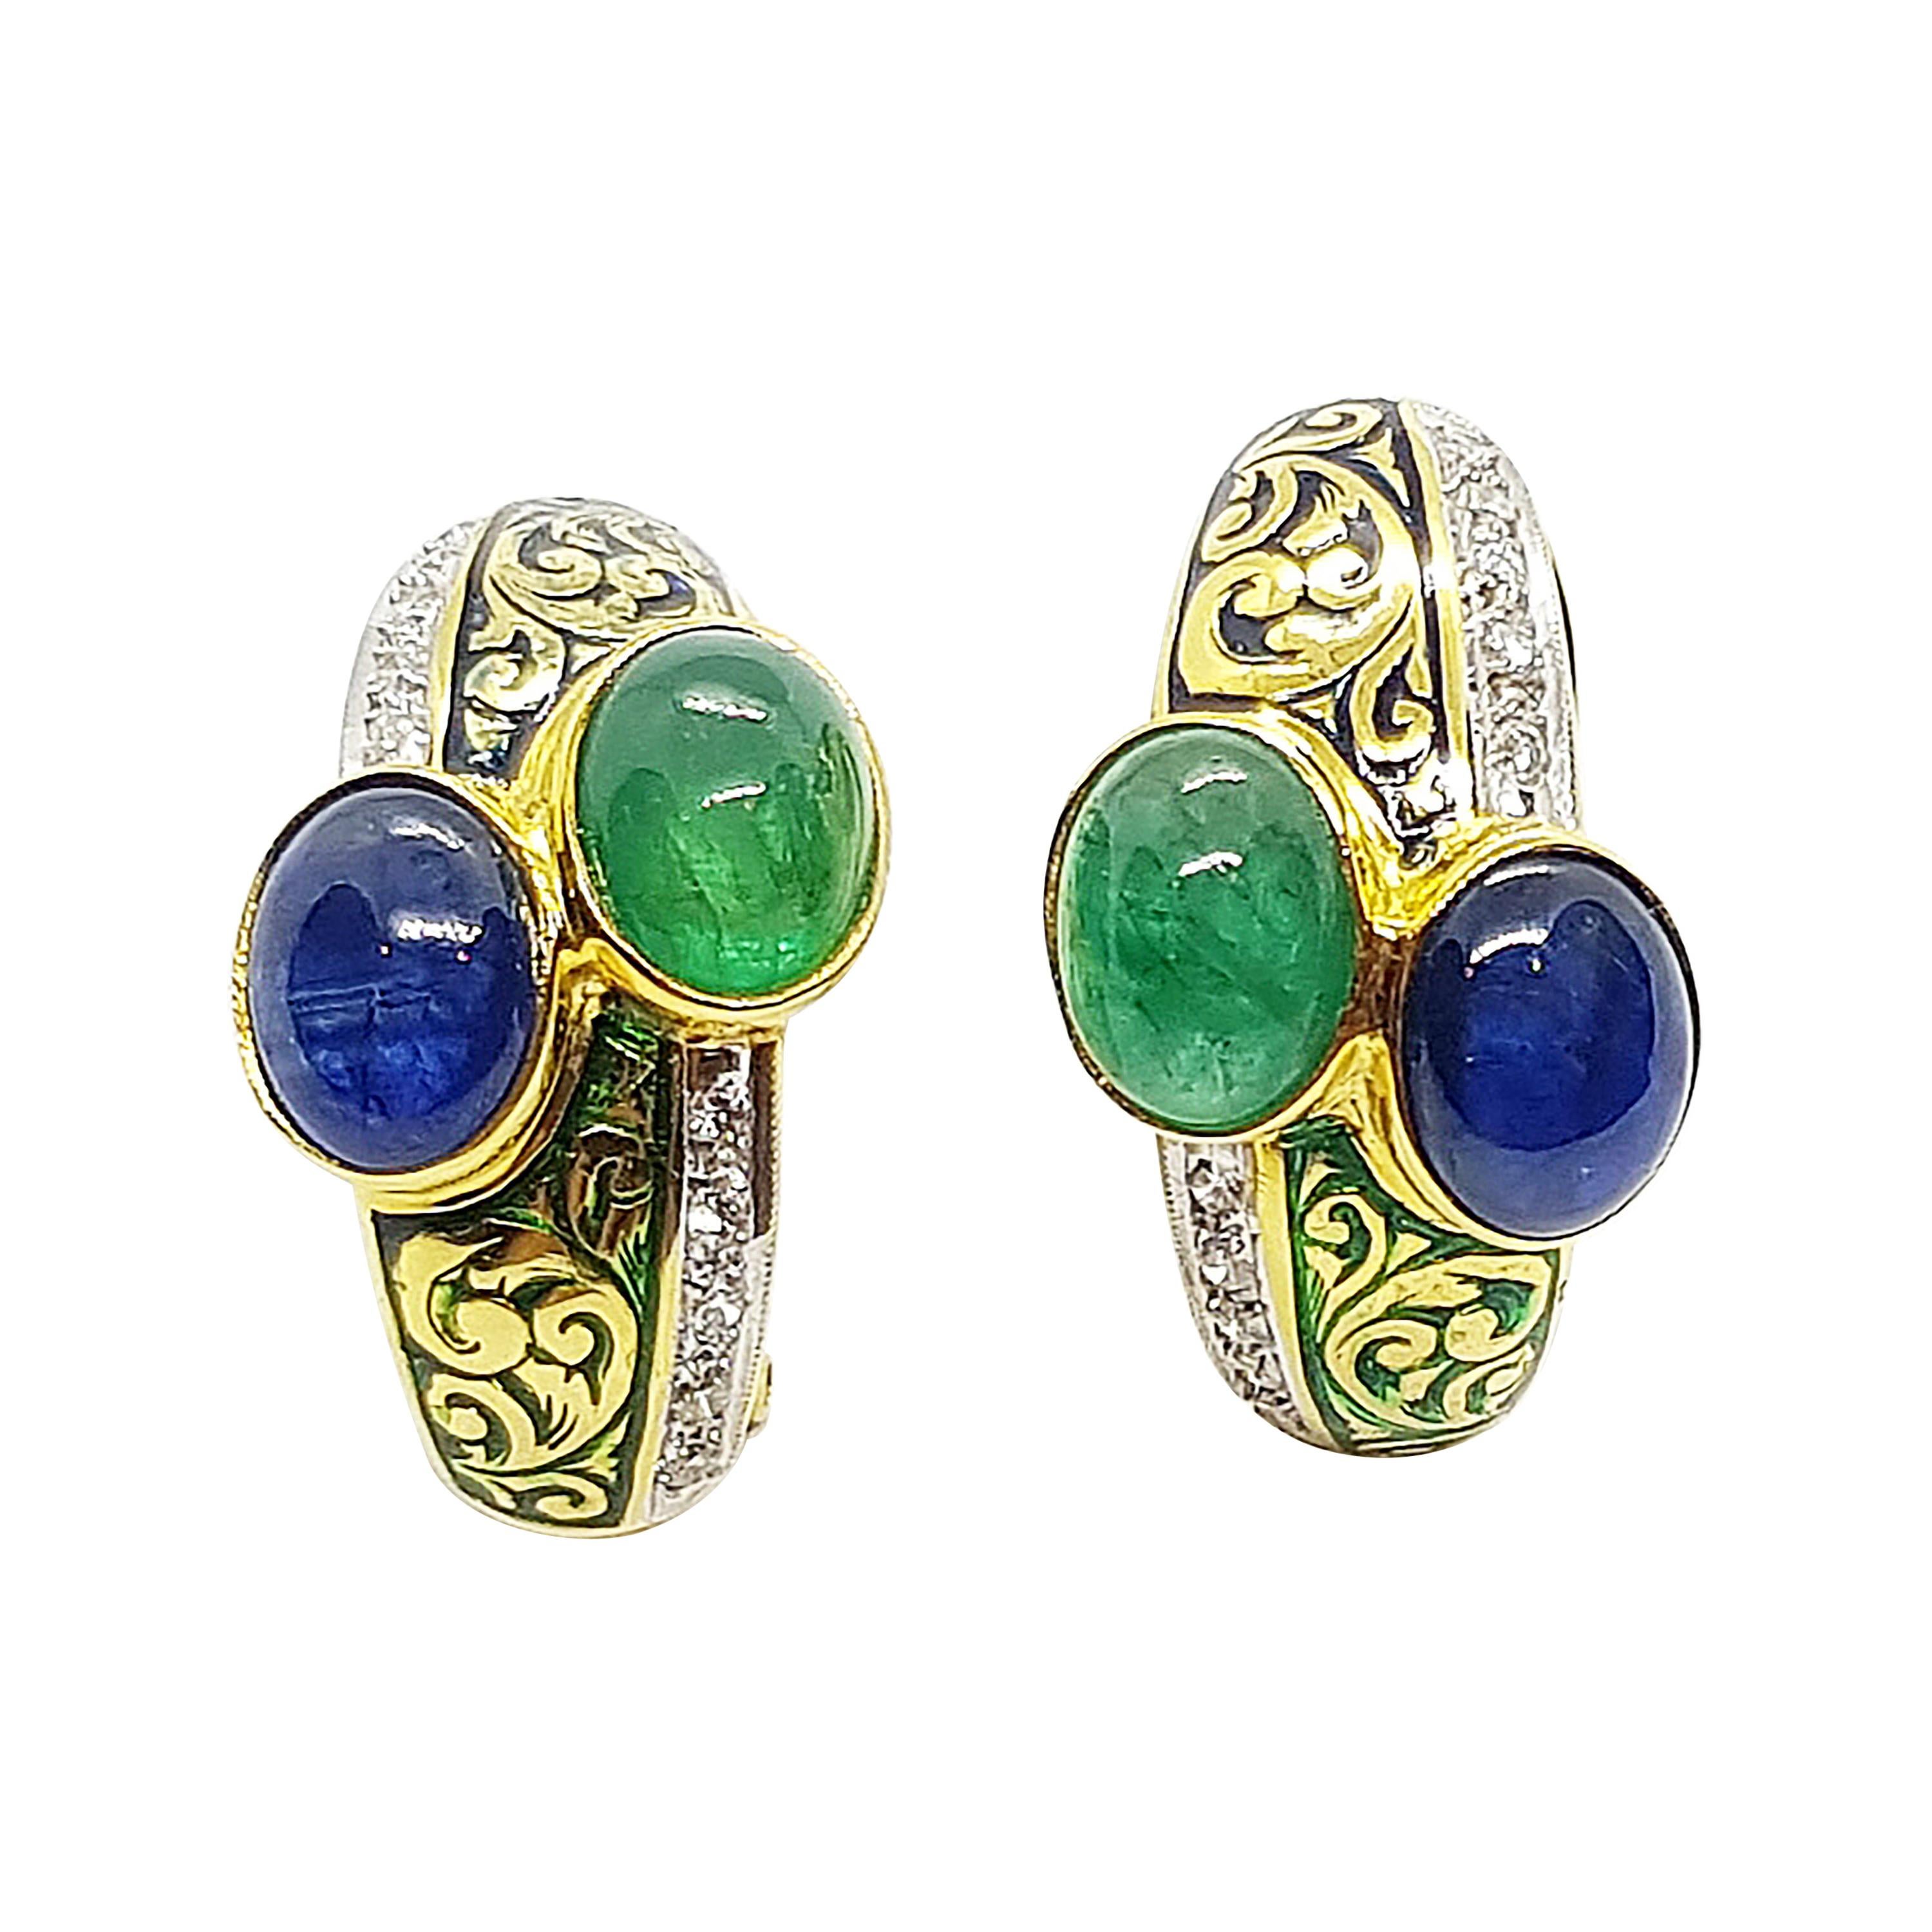 Cabochon Blue Sapphire and Cabochon Emerald with Diamond Earrings 18 Karat Gold